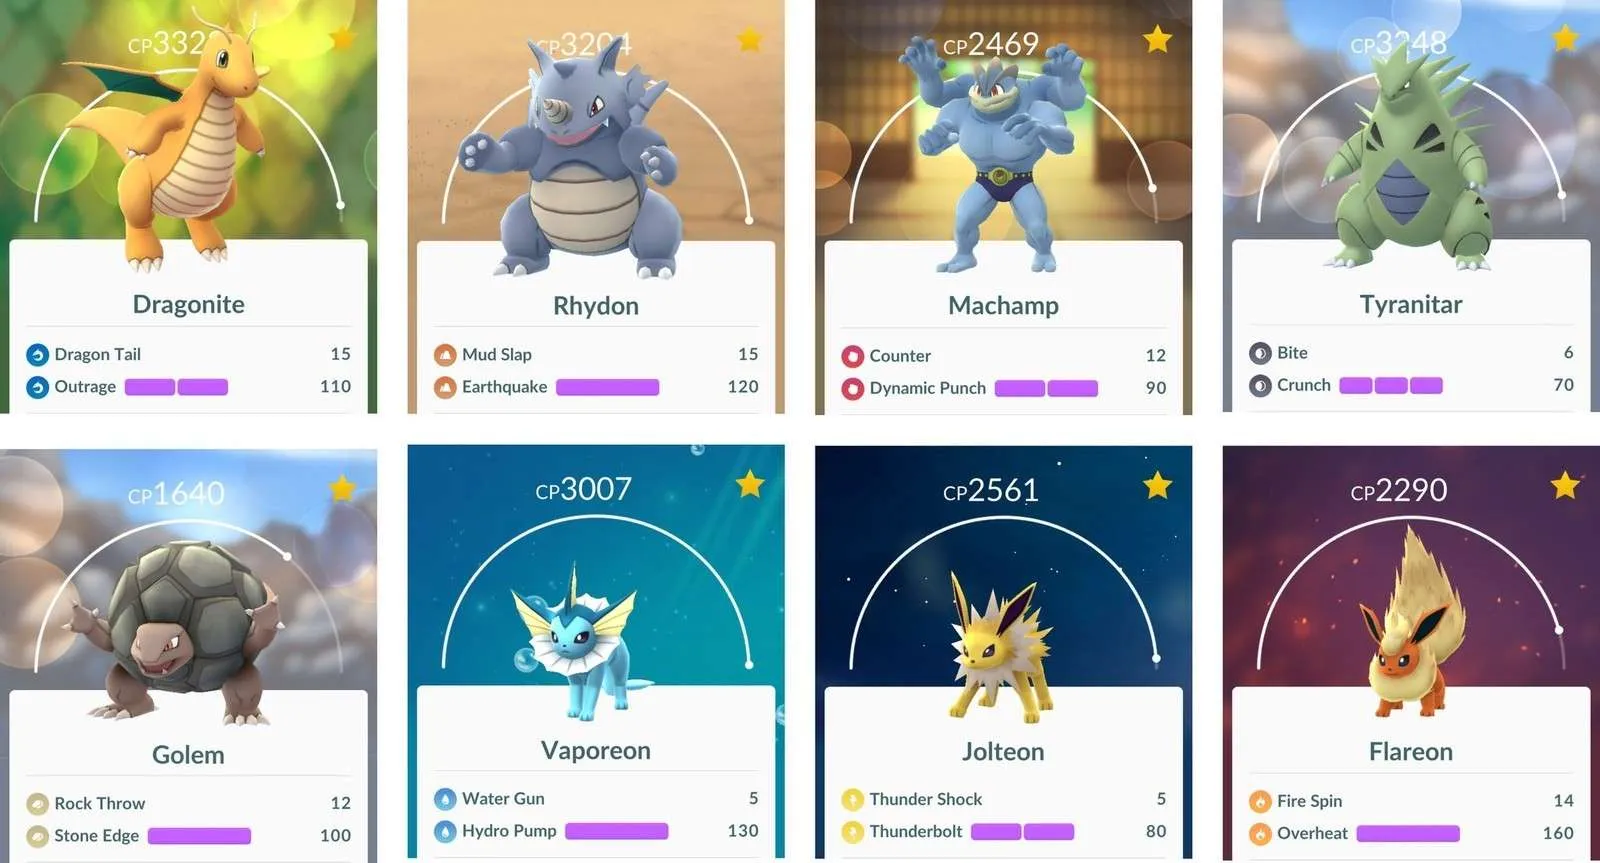 Best movesets to change with Technical Machines (TMs) in Pokémon Go